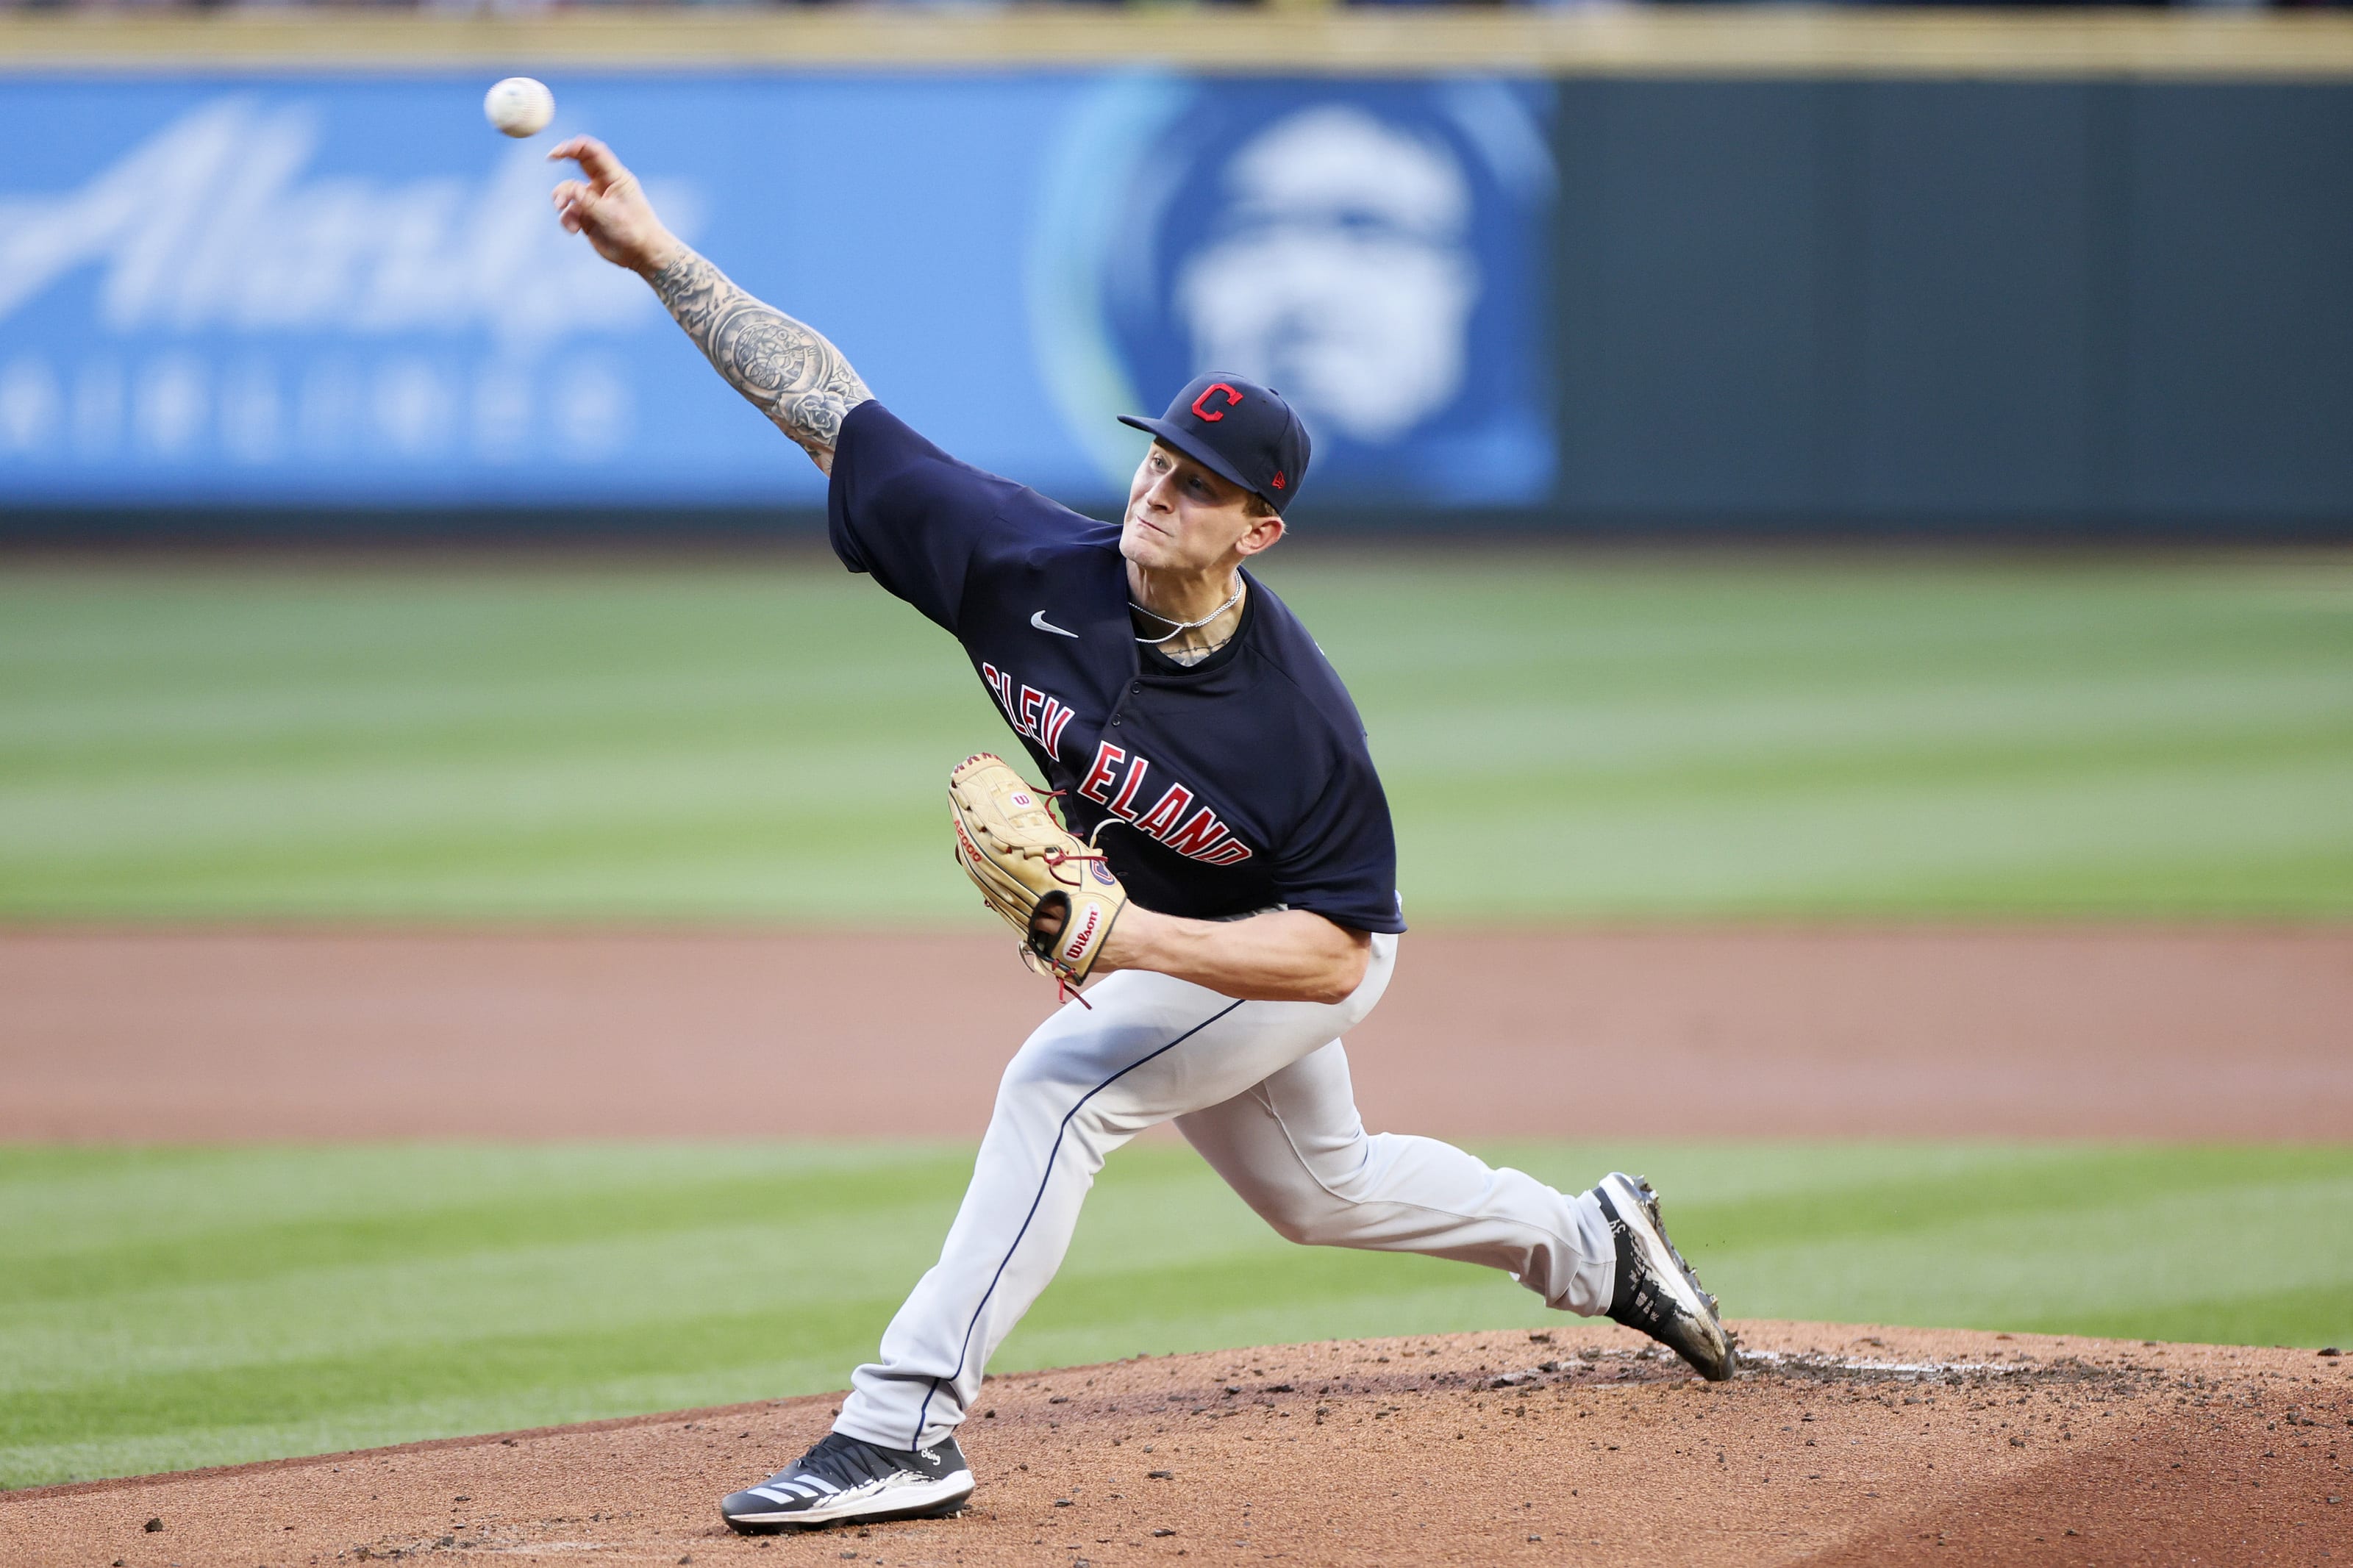 Zach cleveland indians game detroit debut tigers updates makes season vs his live 2021 innings throw goal ap